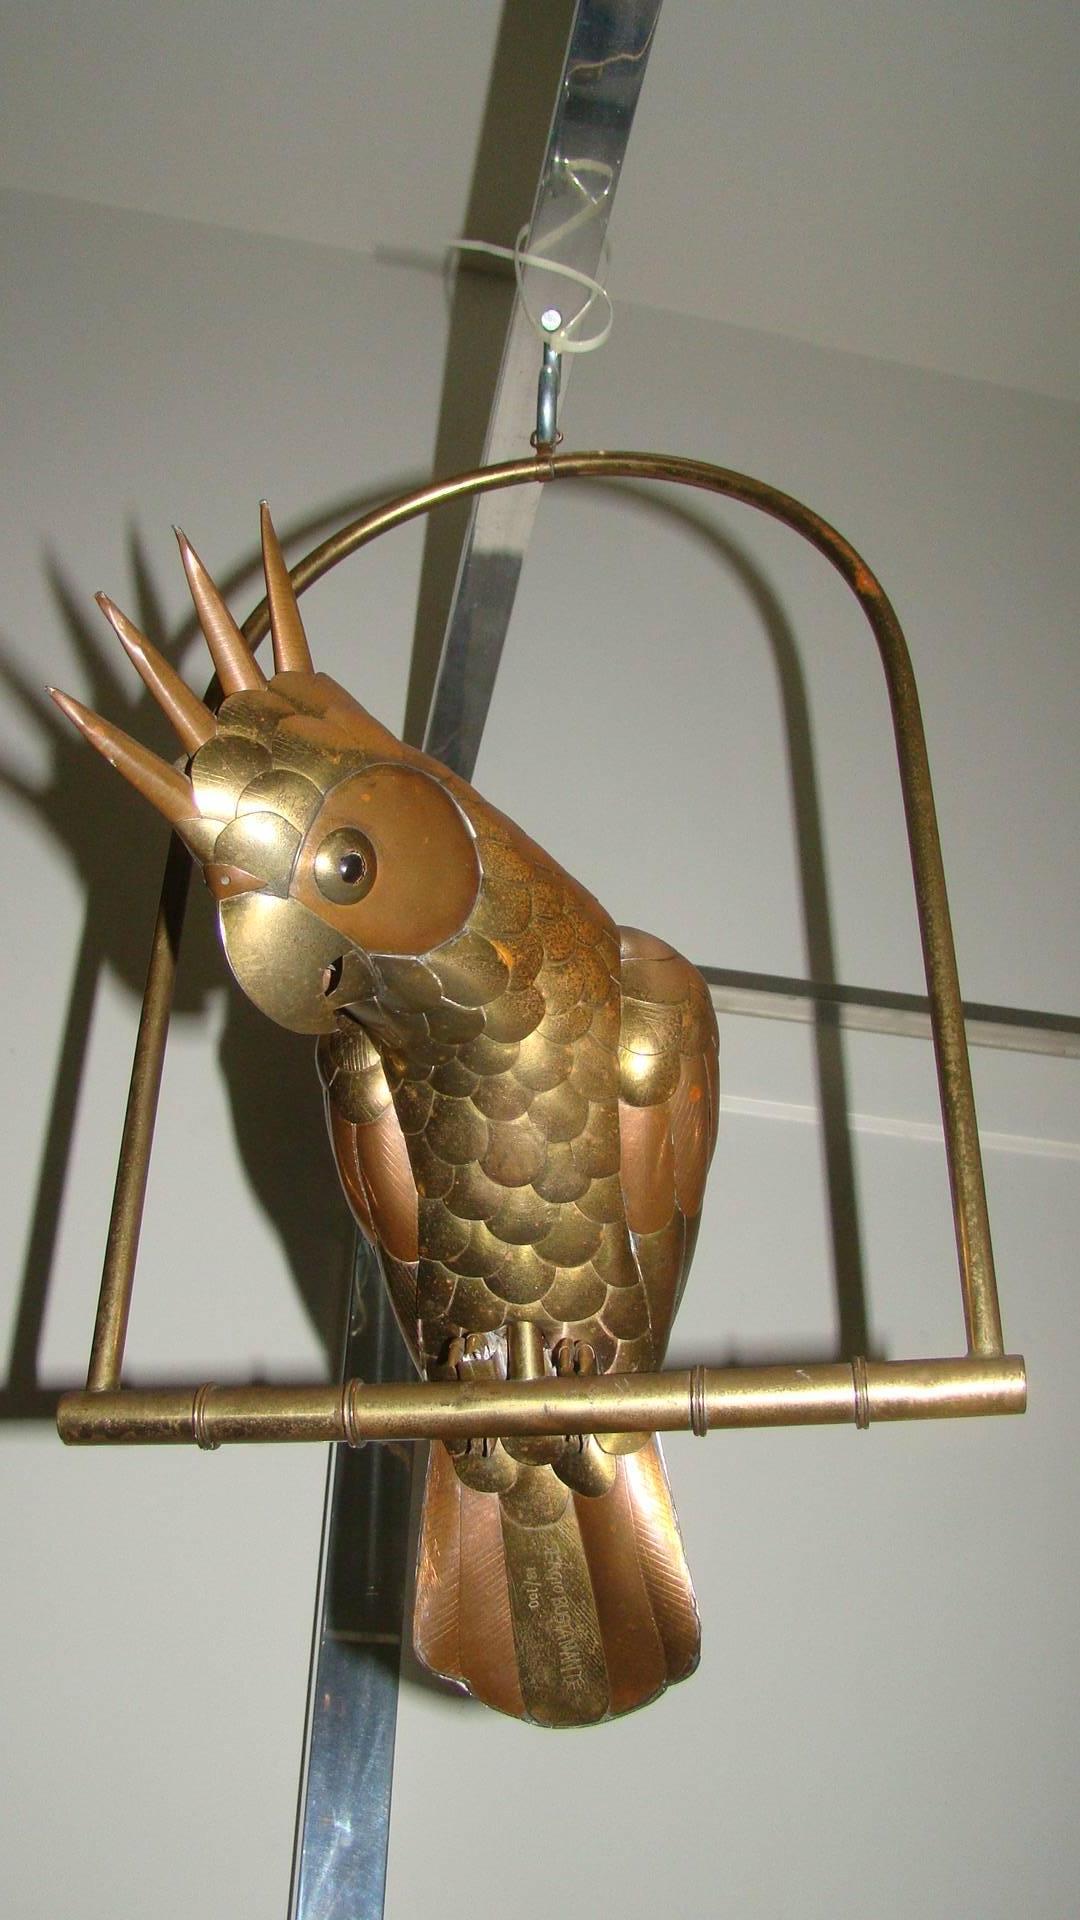 Terrific mixed metal hanging cockatoo sculpture by Mexican Master Sergio Bustamante. This interesting piece depicts a unique spiky haired Parrot resting on perch. It is constructed of hand welded brass and copper. Signed and numbered 13/100.